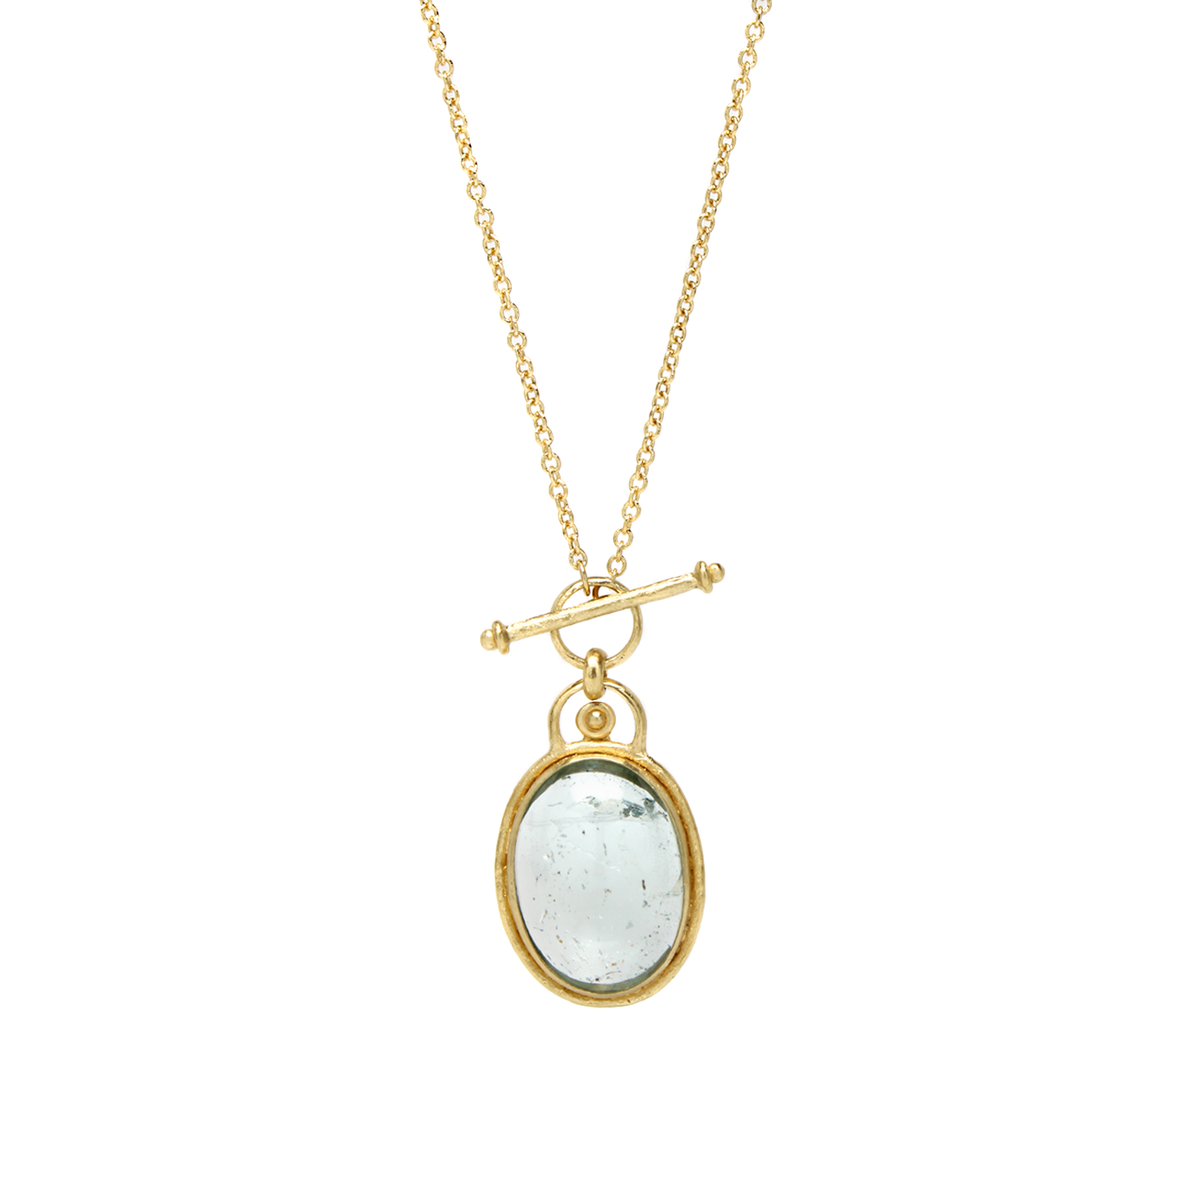 One-of-a-Kind Oval Aquamarine Necklace with Toggle